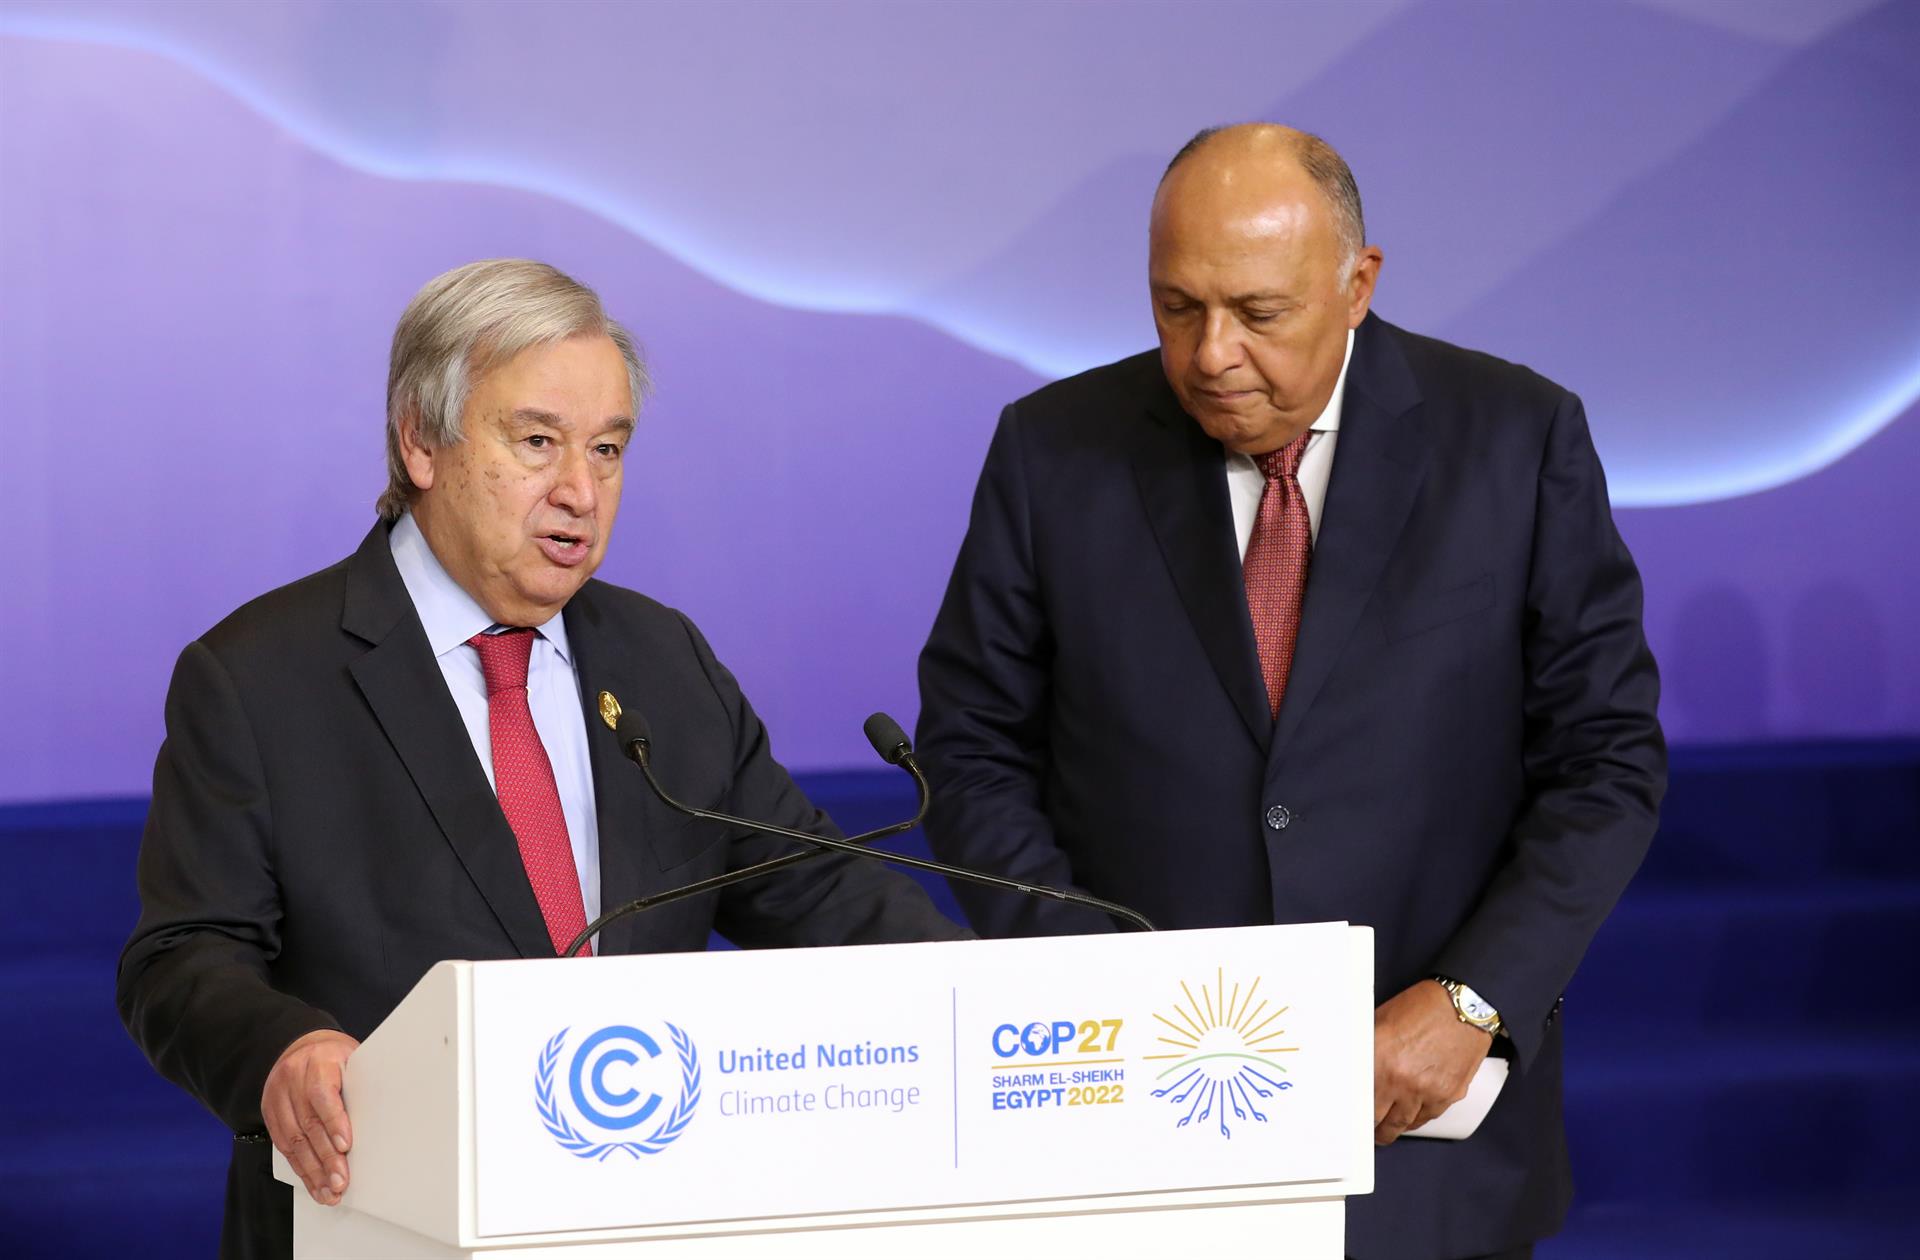 Sharm El-sheikh (Egypt), 17/11/2022.- United Nations Secretary-General Antonio Guterres (L) speaks next to President of the COP27 climate summit Sameh Shoukry (R) during the COP27 UN Climate Summit in Sharm El-Sheikh, Egypt, 17 November 2022. The 2022 United Nations Climate Change Conference (COP27), runs from 06-18 November, and is expected to host one of the largest number of participants in the annual global climate conference as over 40,000 estimated attendees, including heads of states and governments, civil society, media and other relevant stakeholders will attend. The events will include a Climate Implementation Summit, thematic days, flagship initiatives, and Green Zone activities engaging with climate and other global challenges. (Egipto) EFE/EPA/KHALED ELFIQI